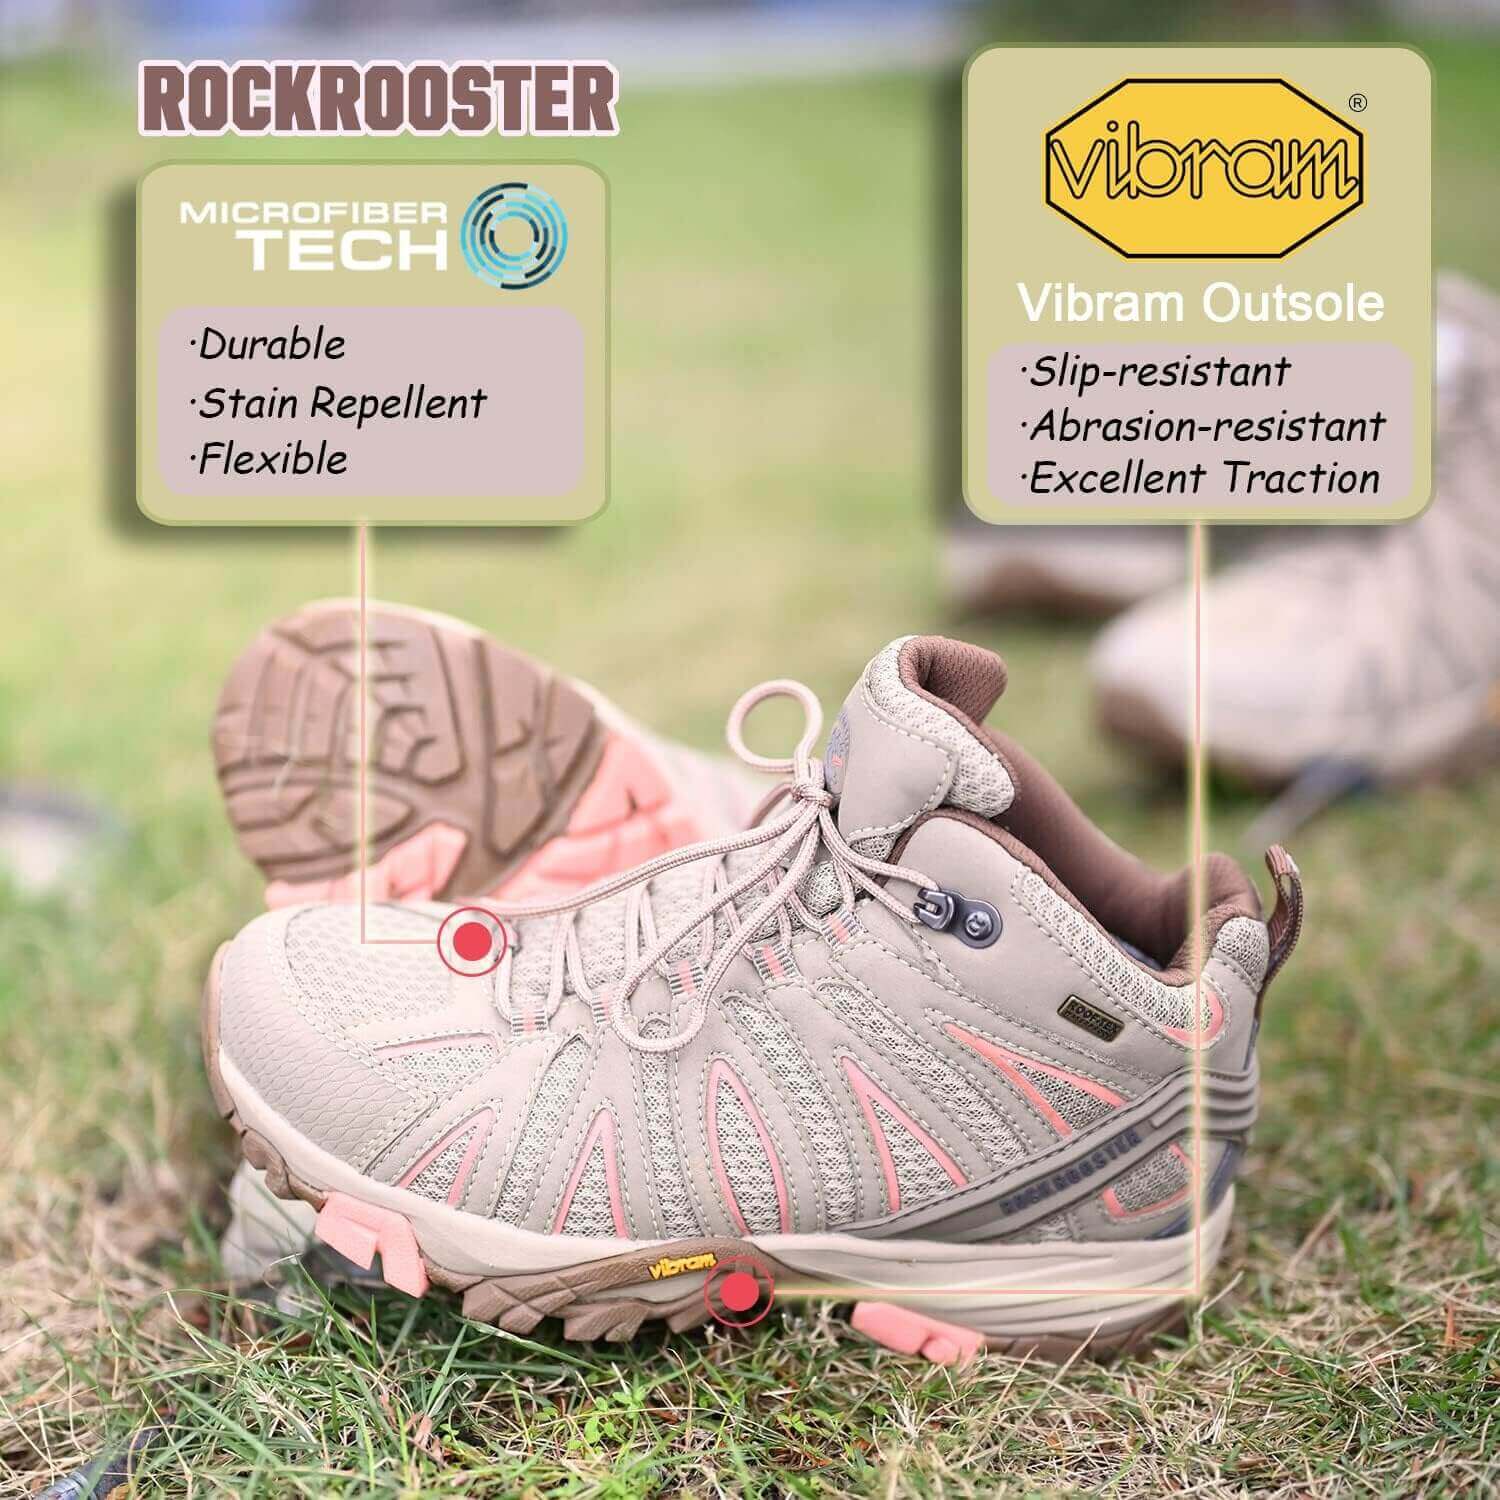 Shop The Latest >ROCKROOSTER Bedrock Women's Mid Waterproof Hiking Boots > *Only $125.99*> From The Top Brand > *Rockroosterl* > Shop Now and Get Free Shipping On Orders Over $45.00 >*Shop Earth Foot*